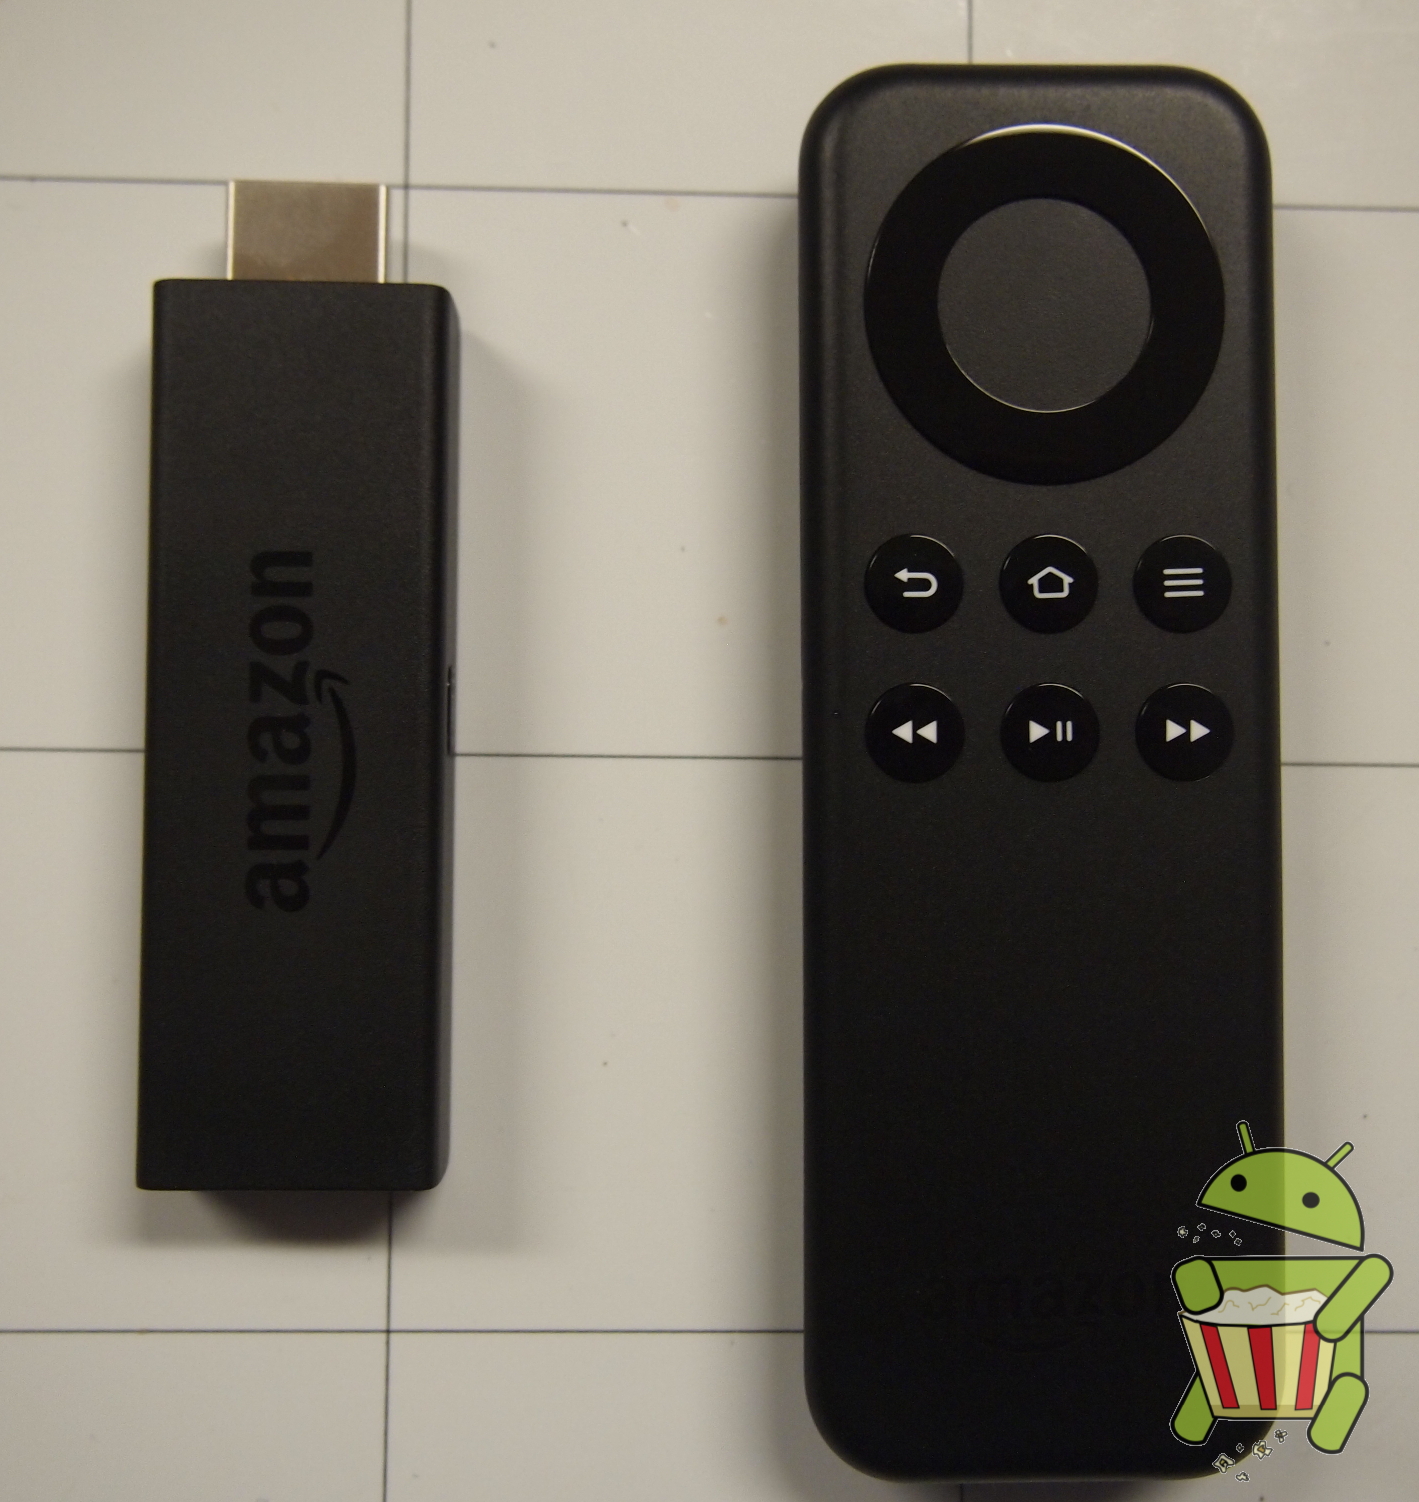 Amazon Fire TV Stick With Remote.JPG